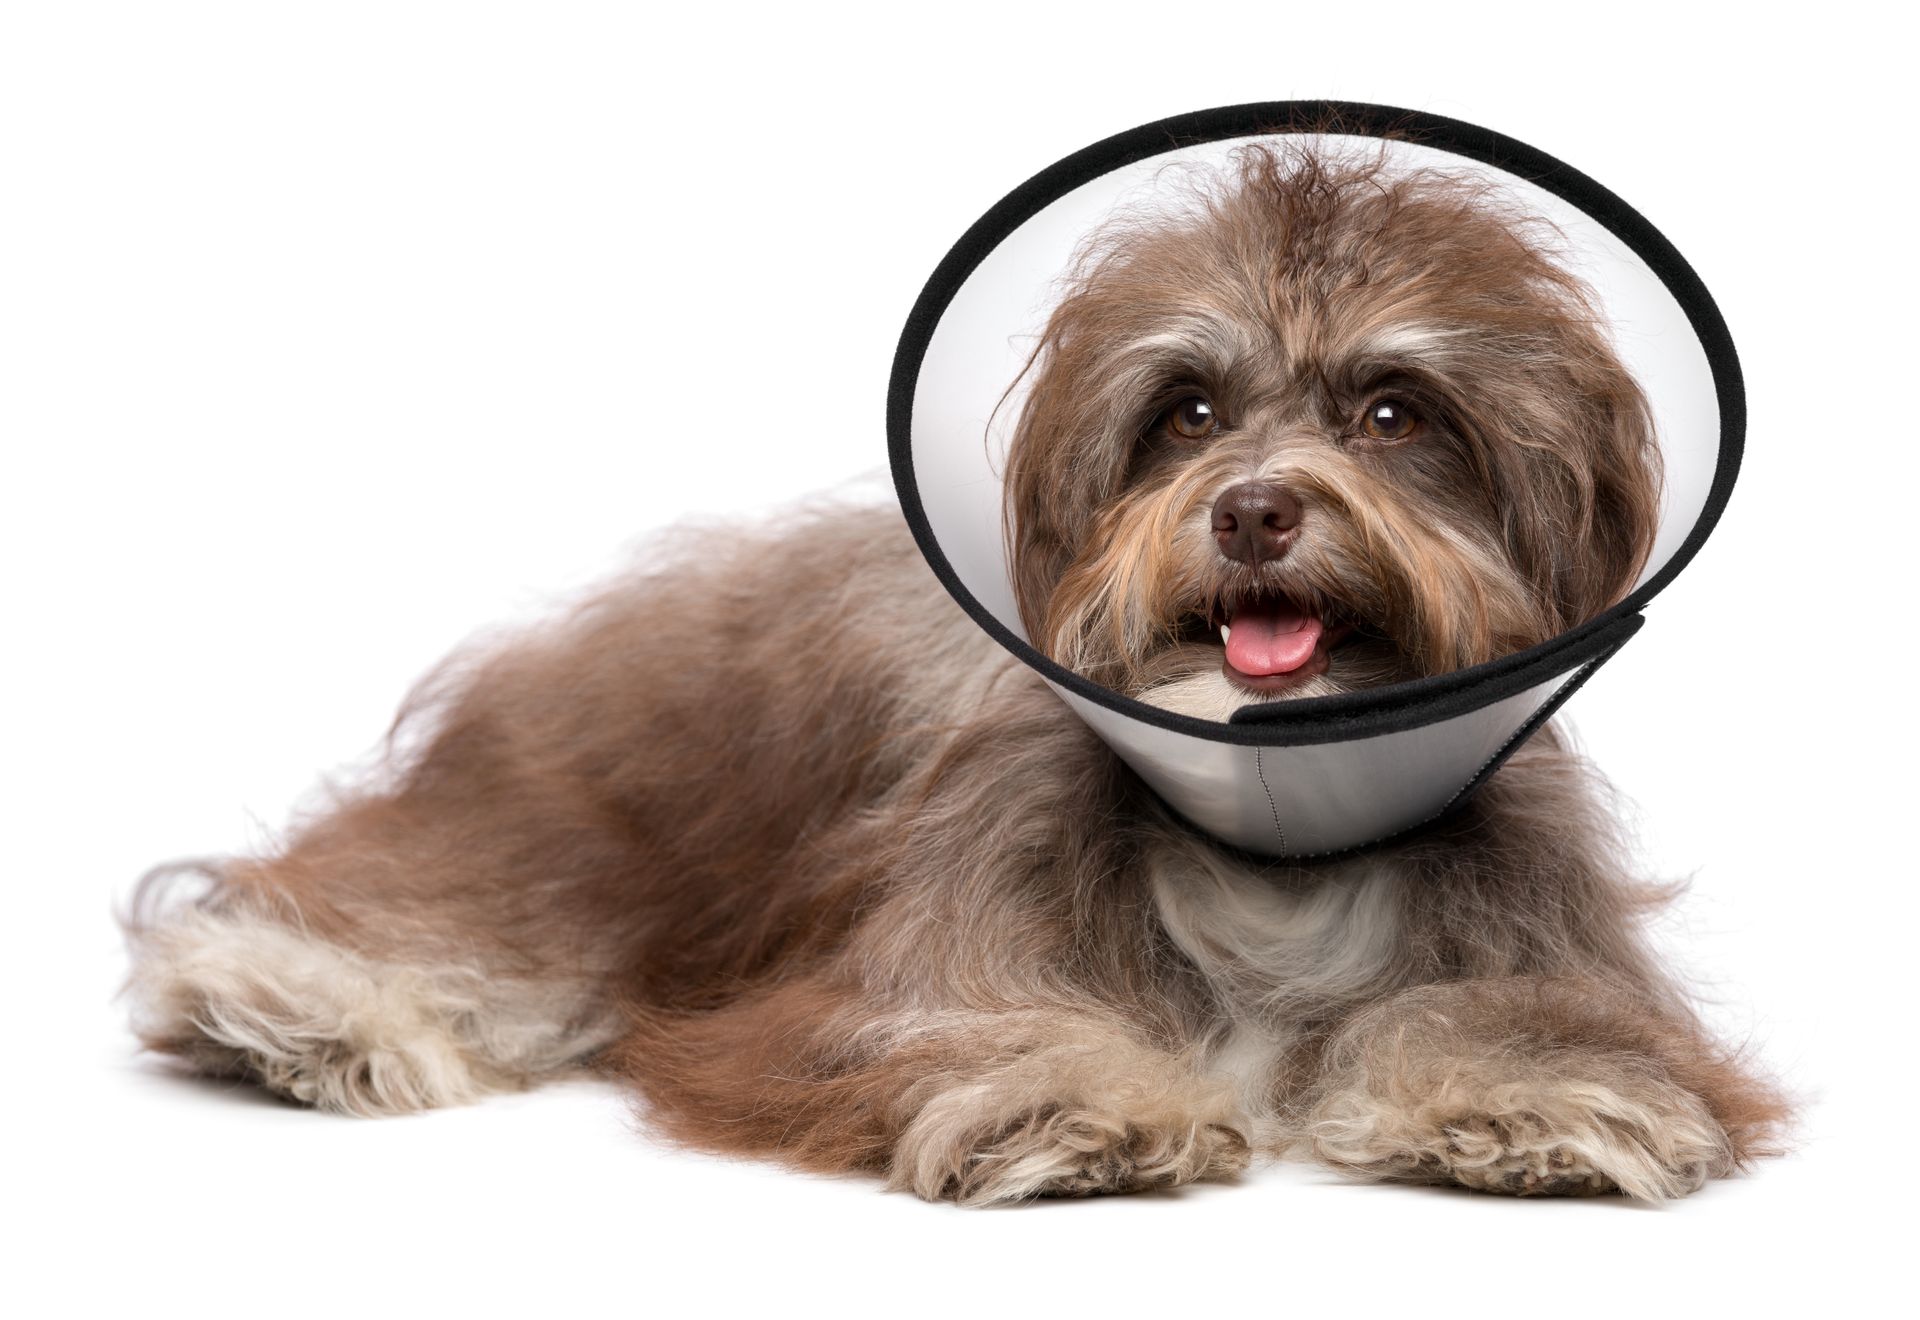 Can dog lick after neutering?